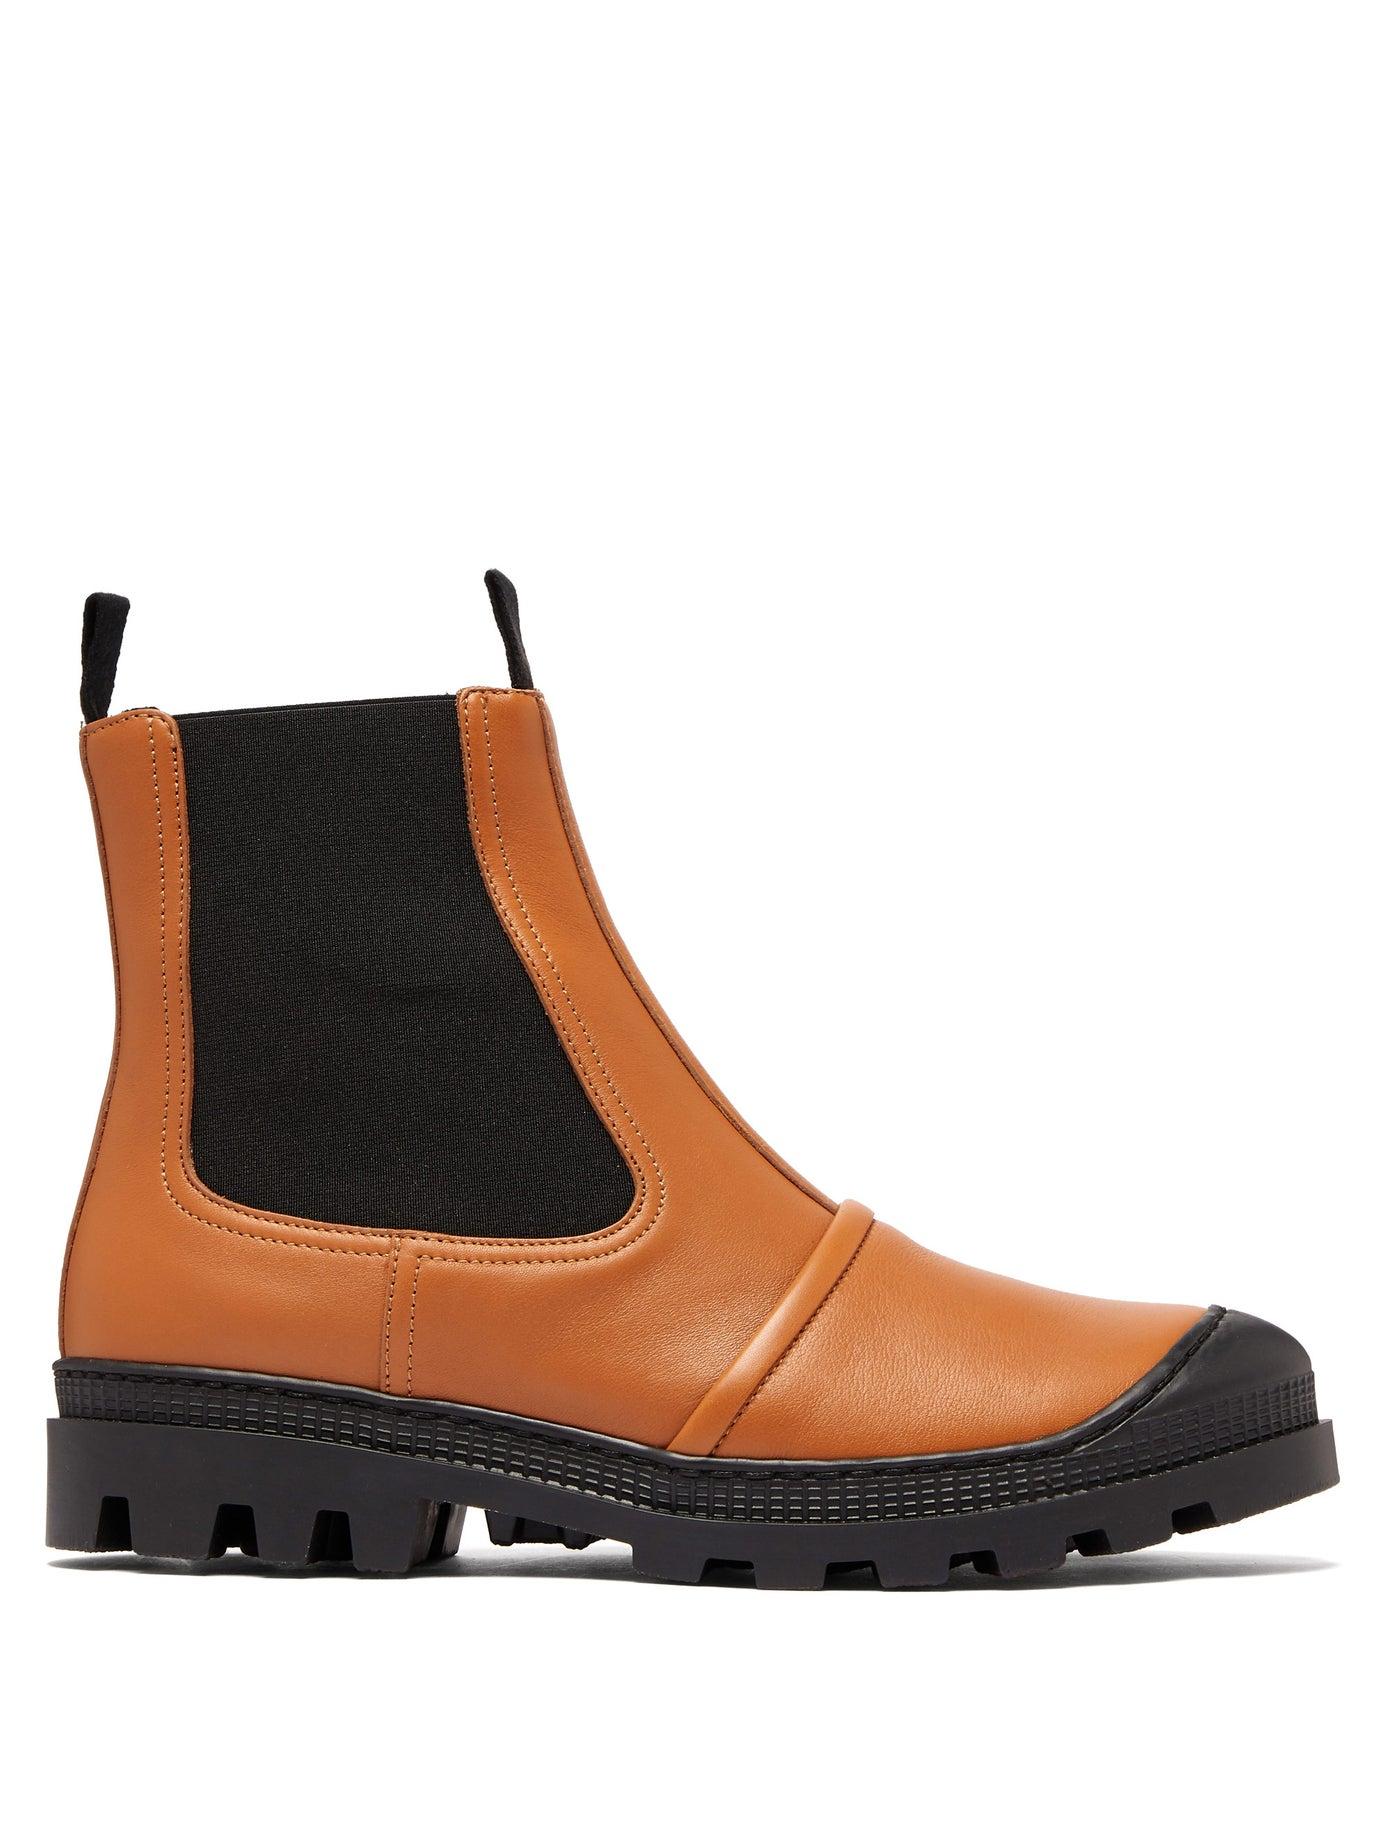 Loewe Rubber-paneled Leather Chelsea Boots in Tan (Brown) - Save 57% - Lyst